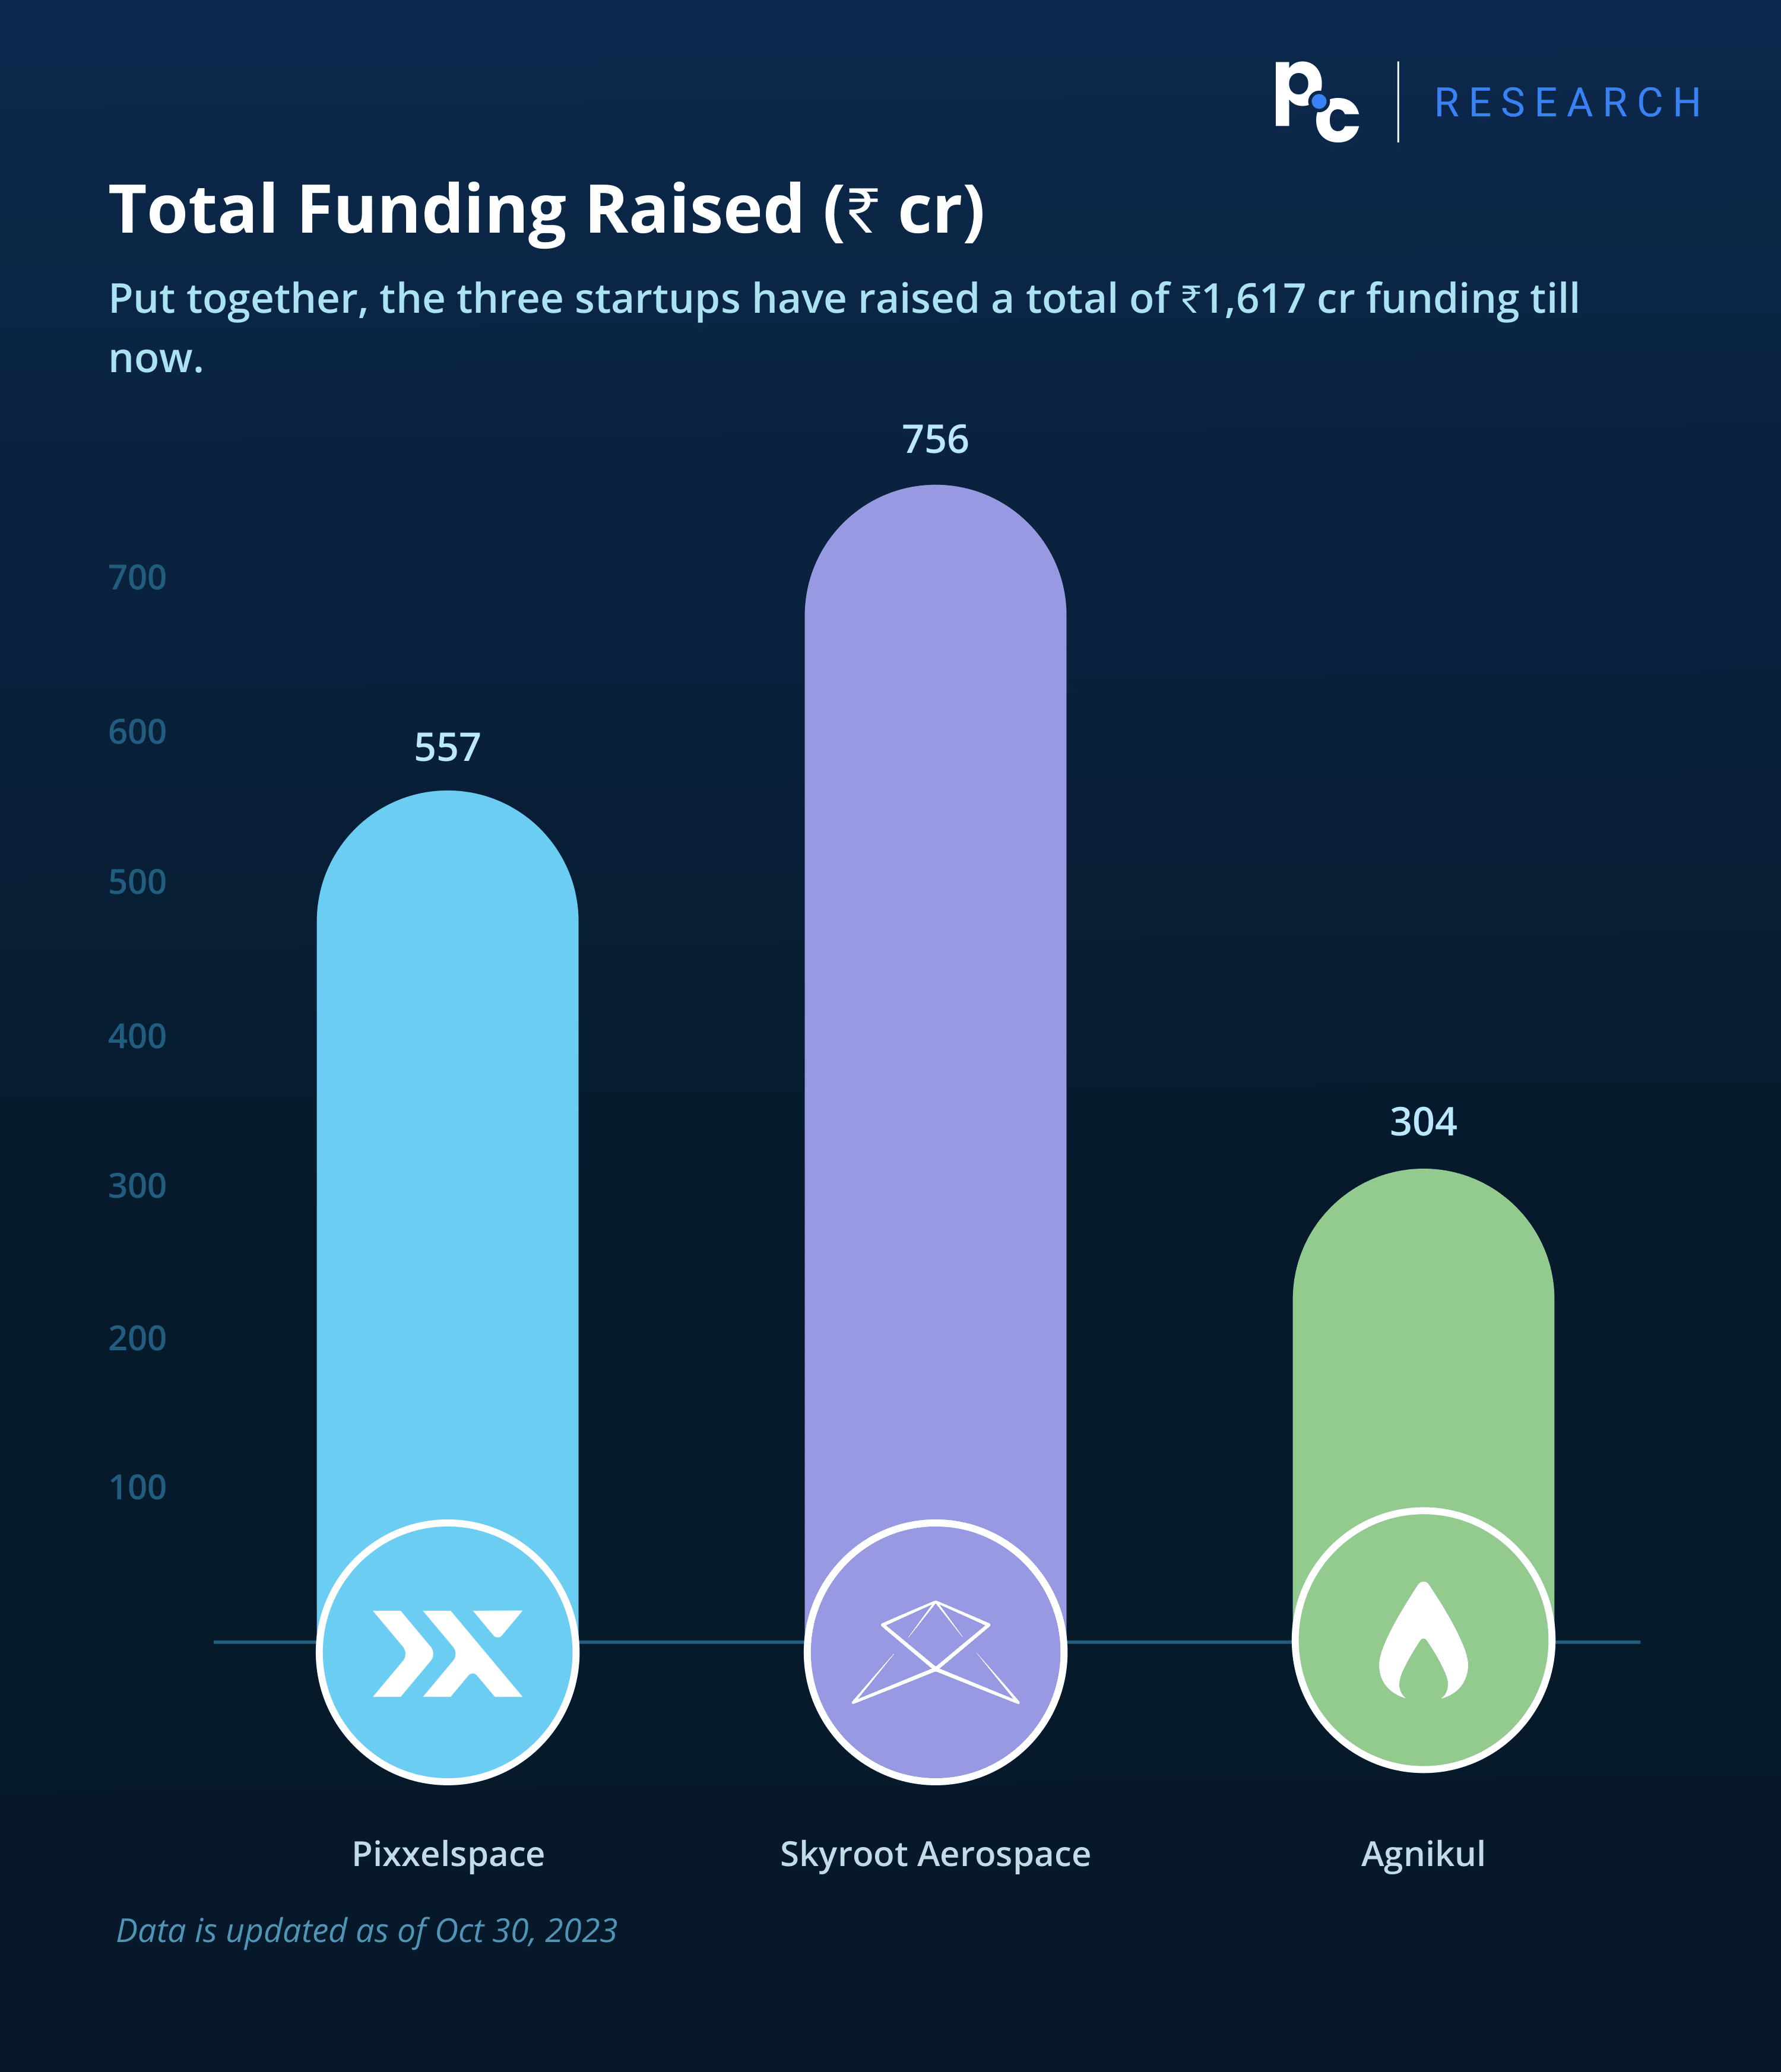 Pixxelspace vs Skyroot Aerospace vs Agnikul 2023: Total Funding Raised (₹ cr).

Put together, the three startups have raised a total of ₹1,617 cr funding till now.

Data is updated as of Oct 30, 2023